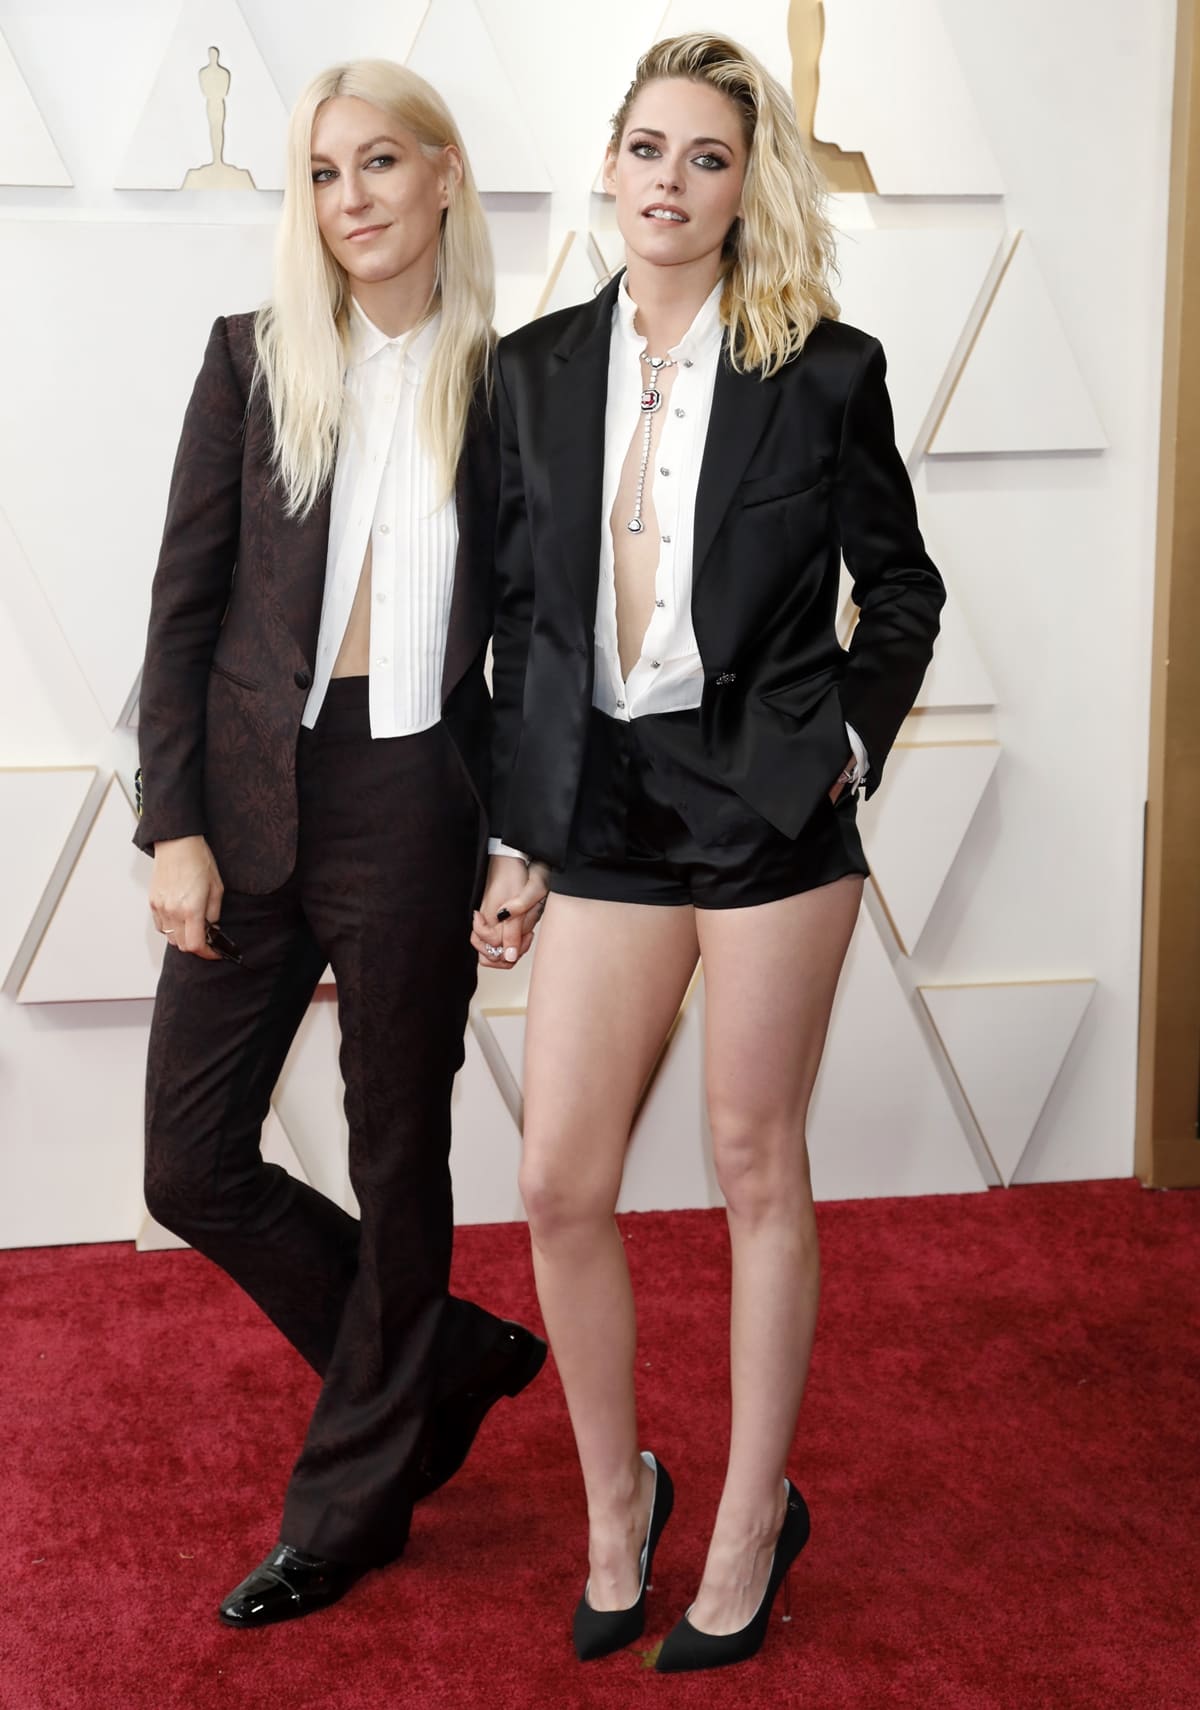 Dylan Meyer in a Damari suit and Kristen Stewart in Chanel at the 94th Annual Academy Awards at Hollywood